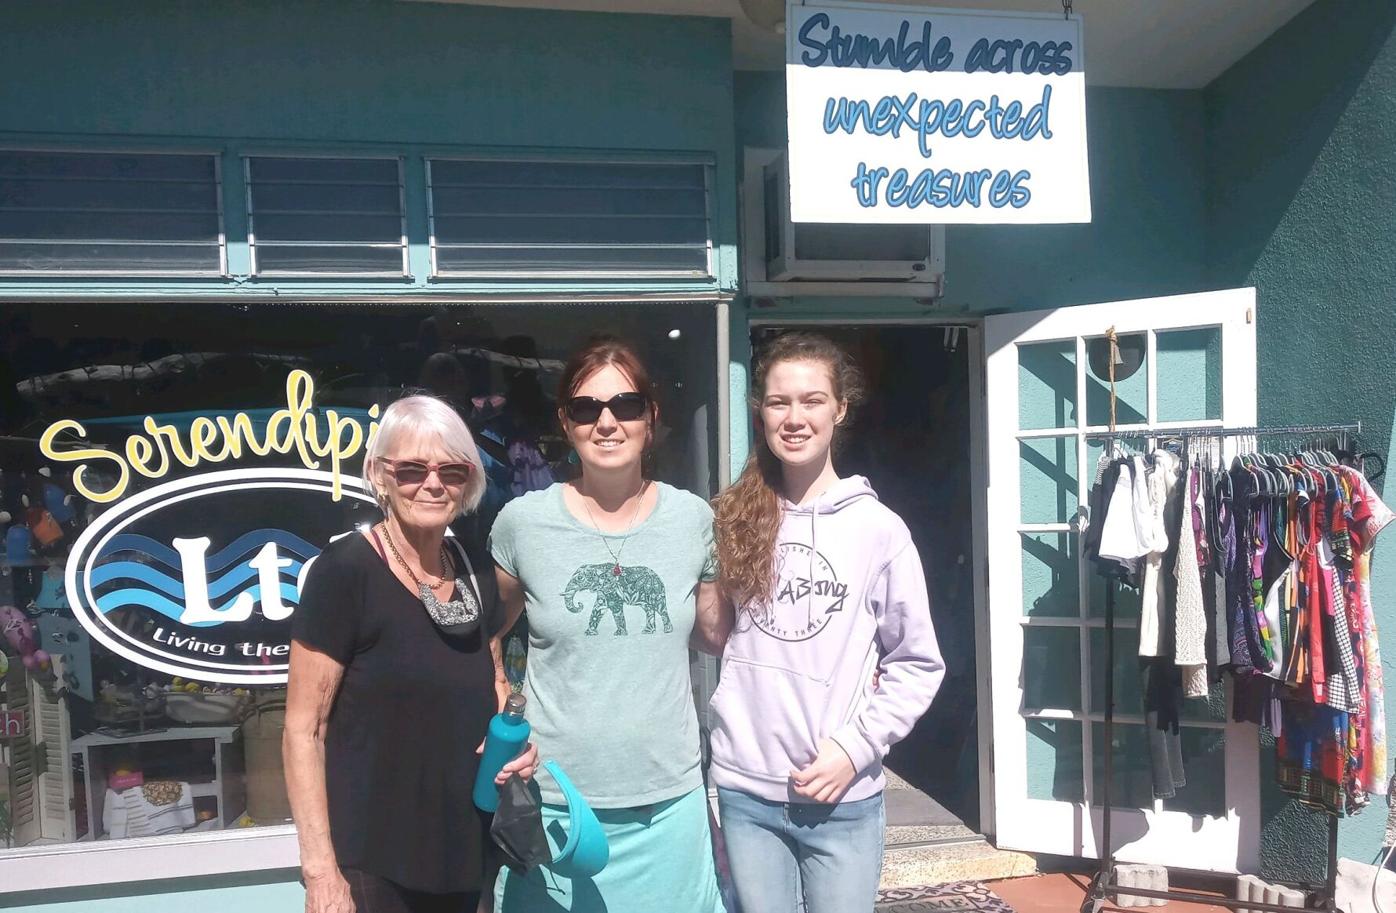 Irene Parker, Tanzel Picard and Kaira Picard shopped at Serendipity LTD on Dearborn Street.